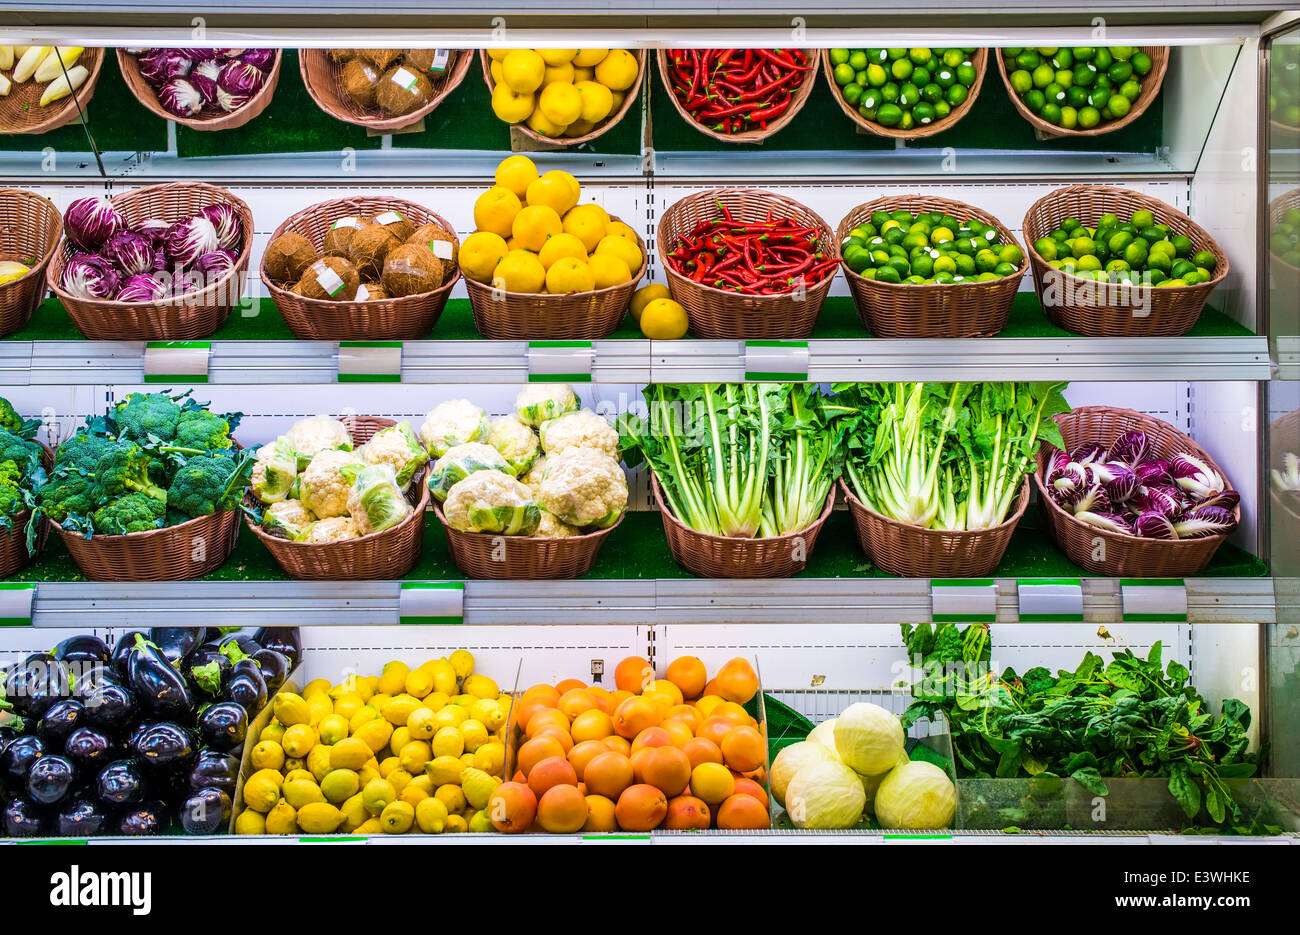 Fruits and vegetables on a supermarket shelf. Stock Photo